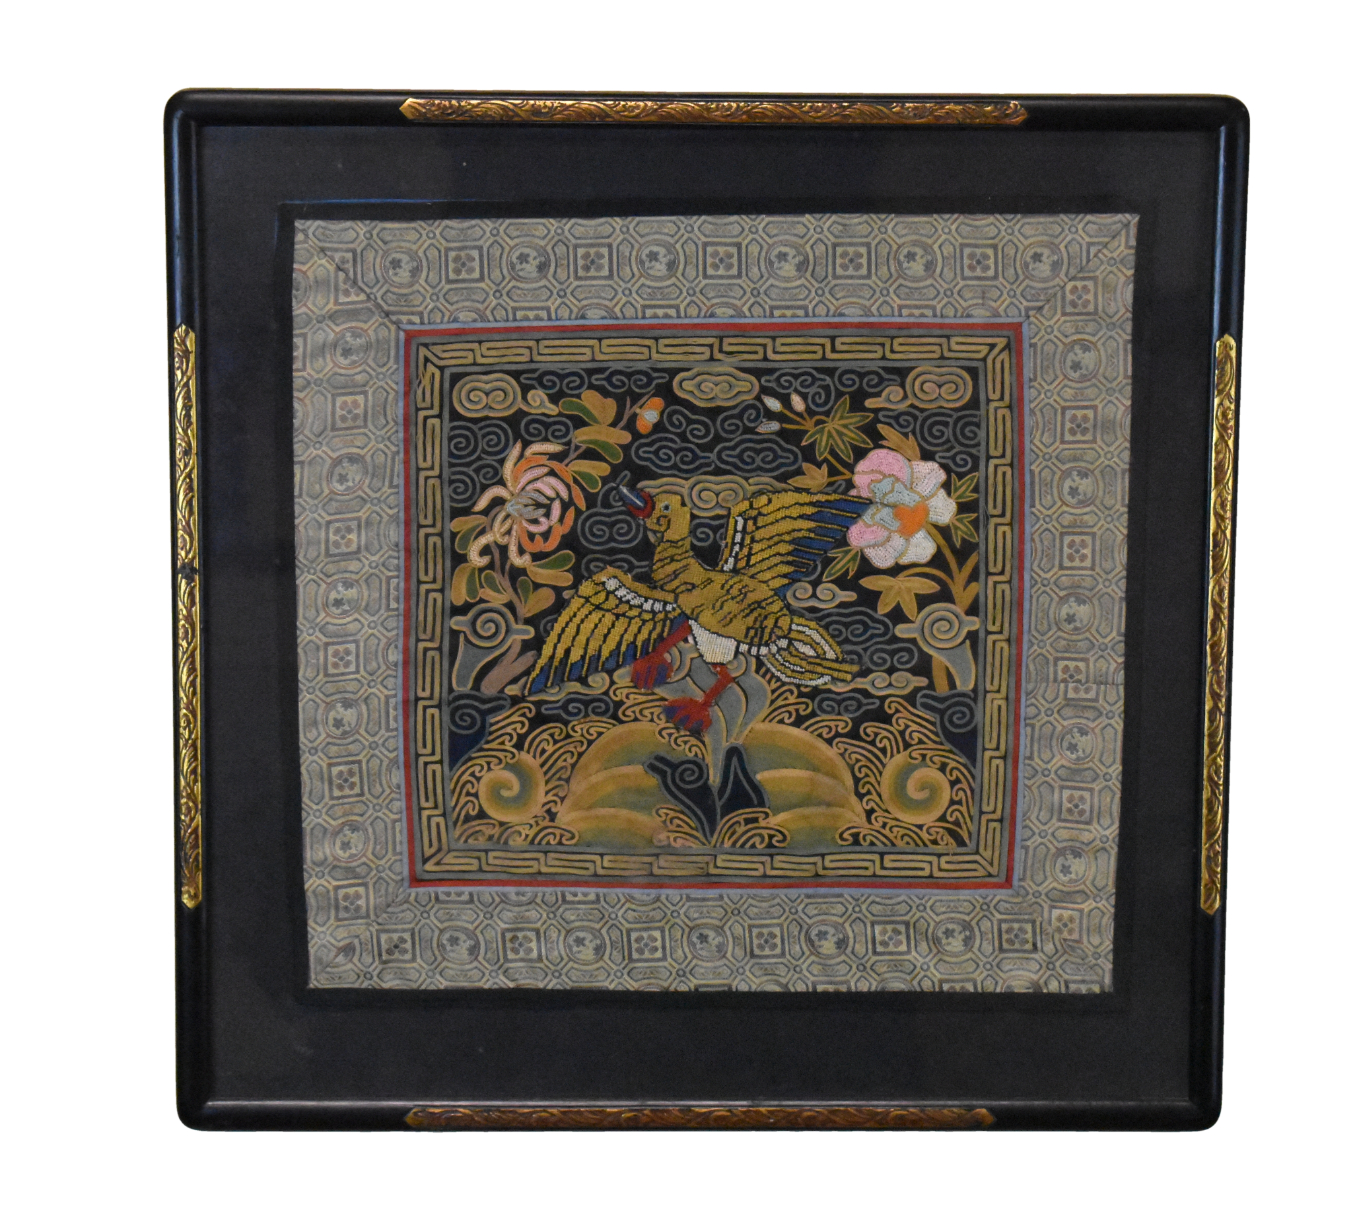 CHINESE FRAMED EMBRODEIRY BUZI  33a8d7